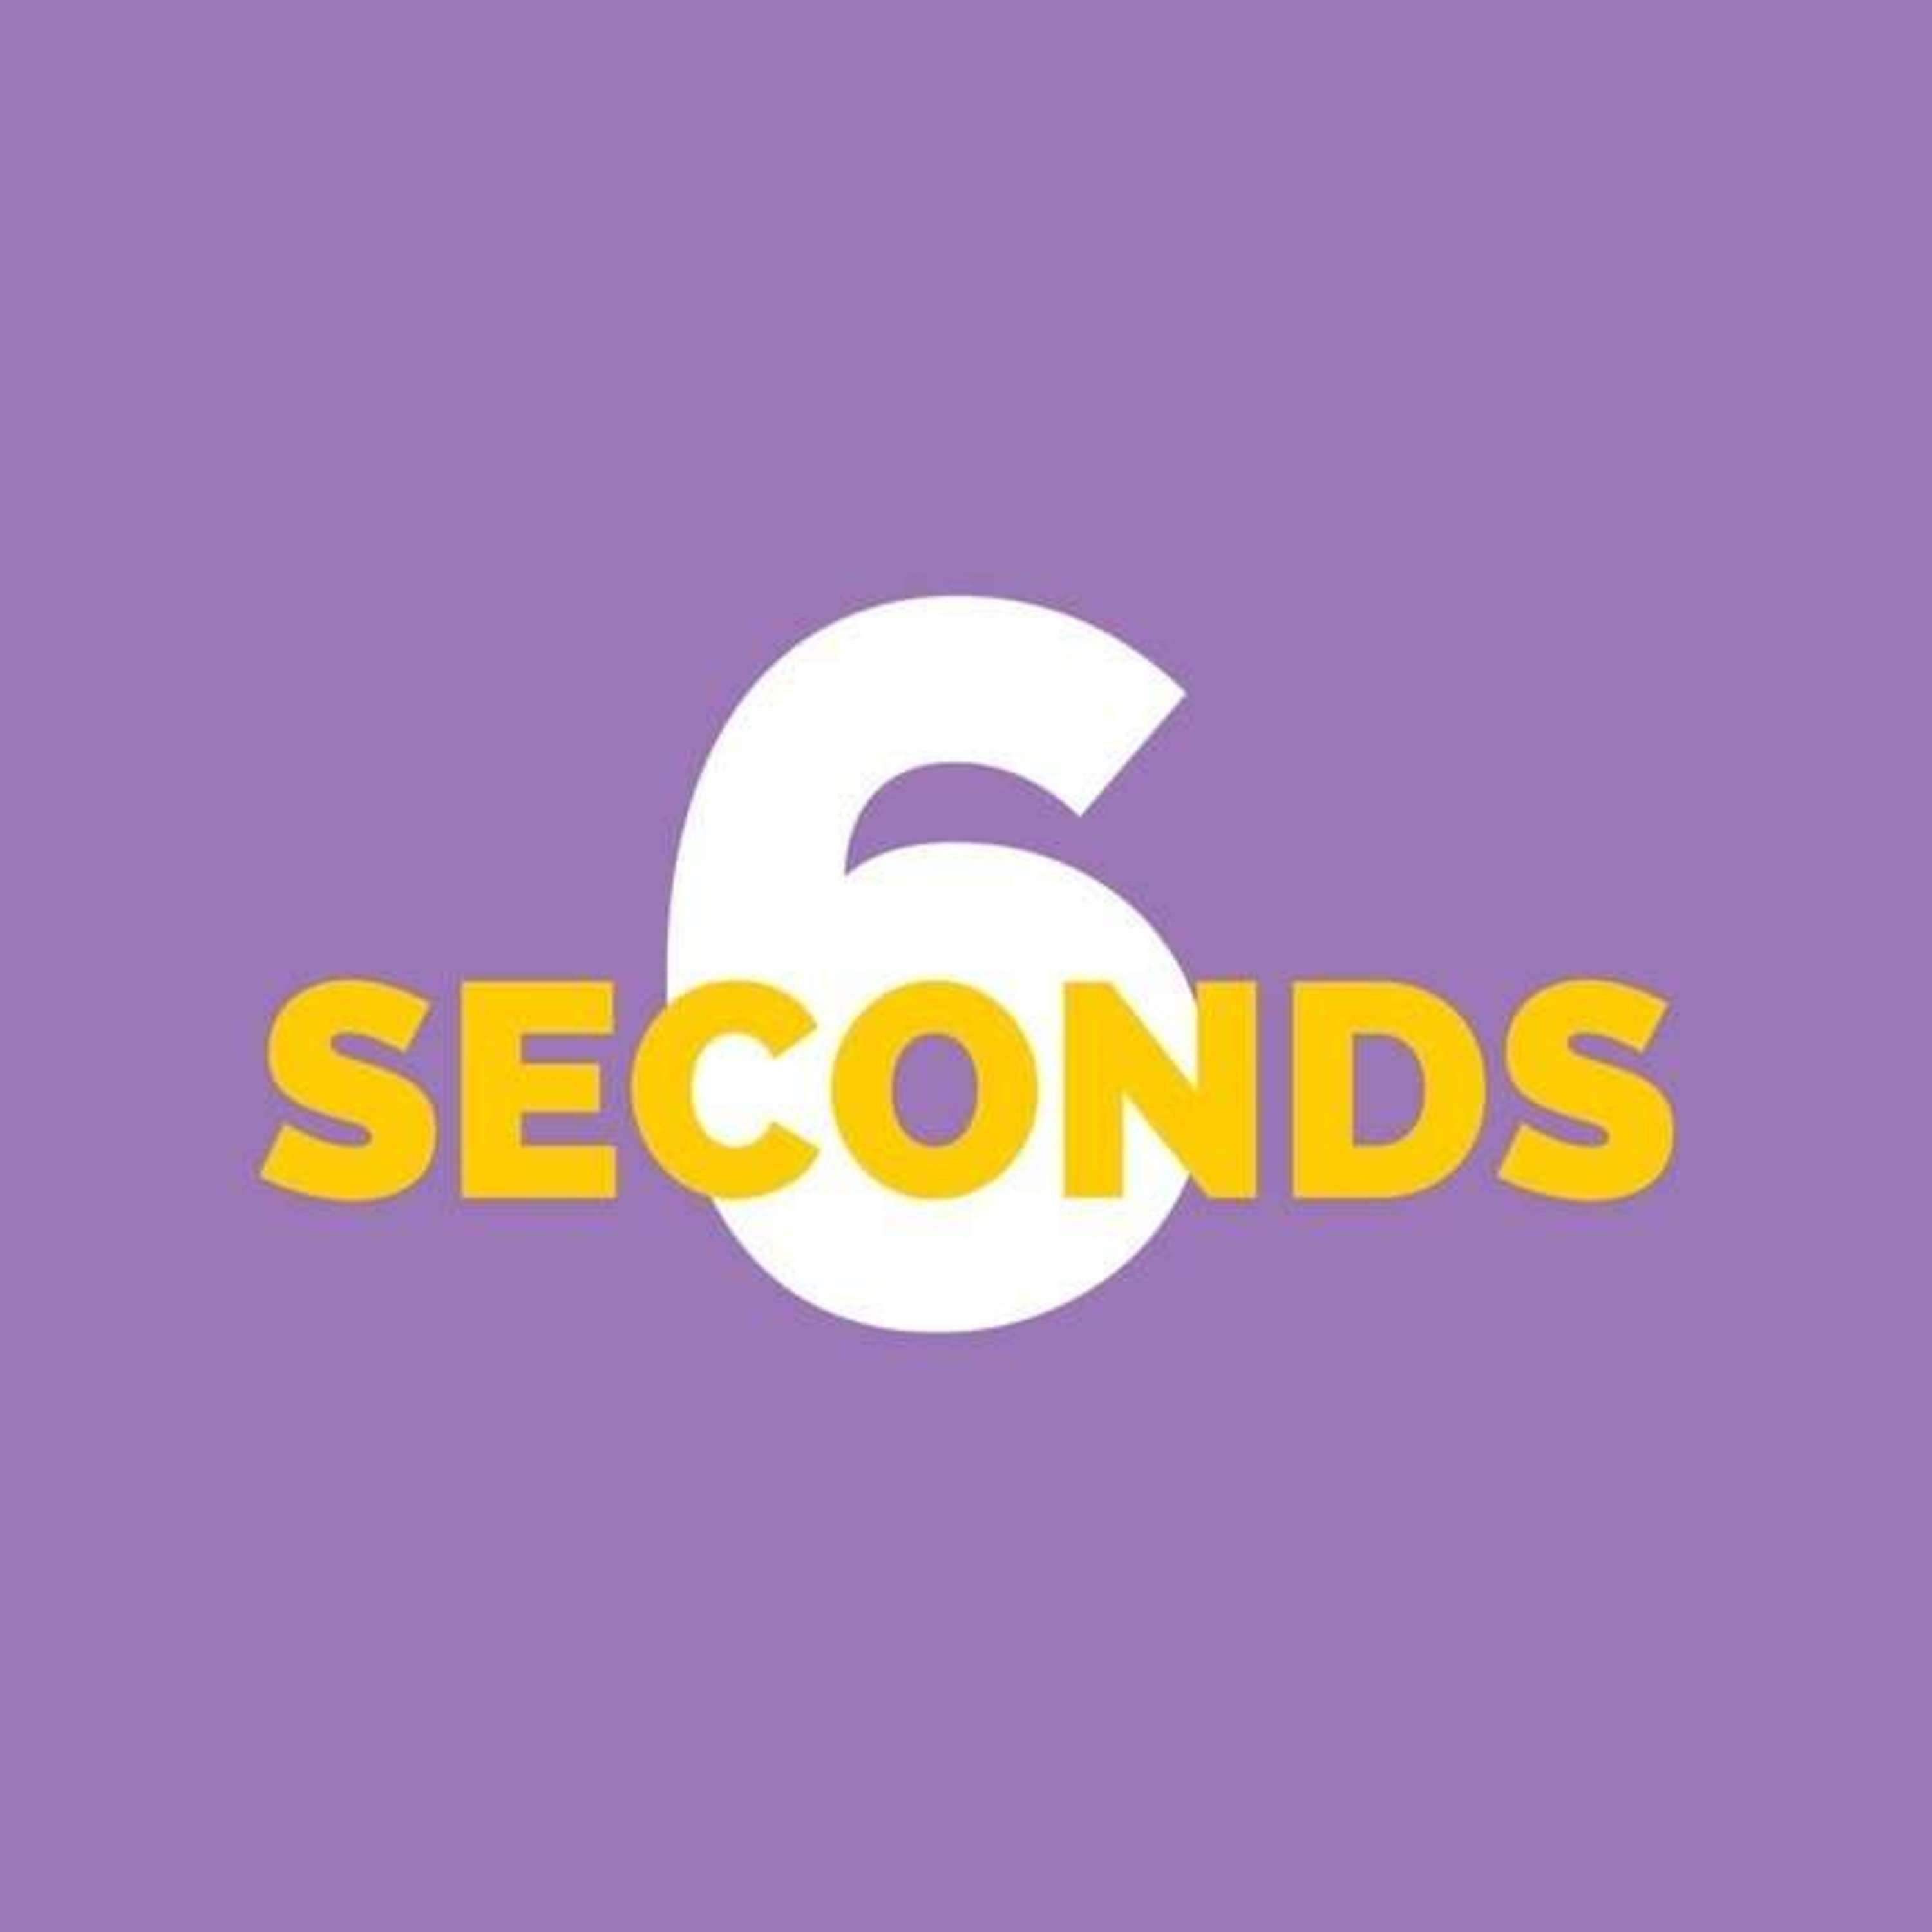 001 - Welcome to 6 seconds